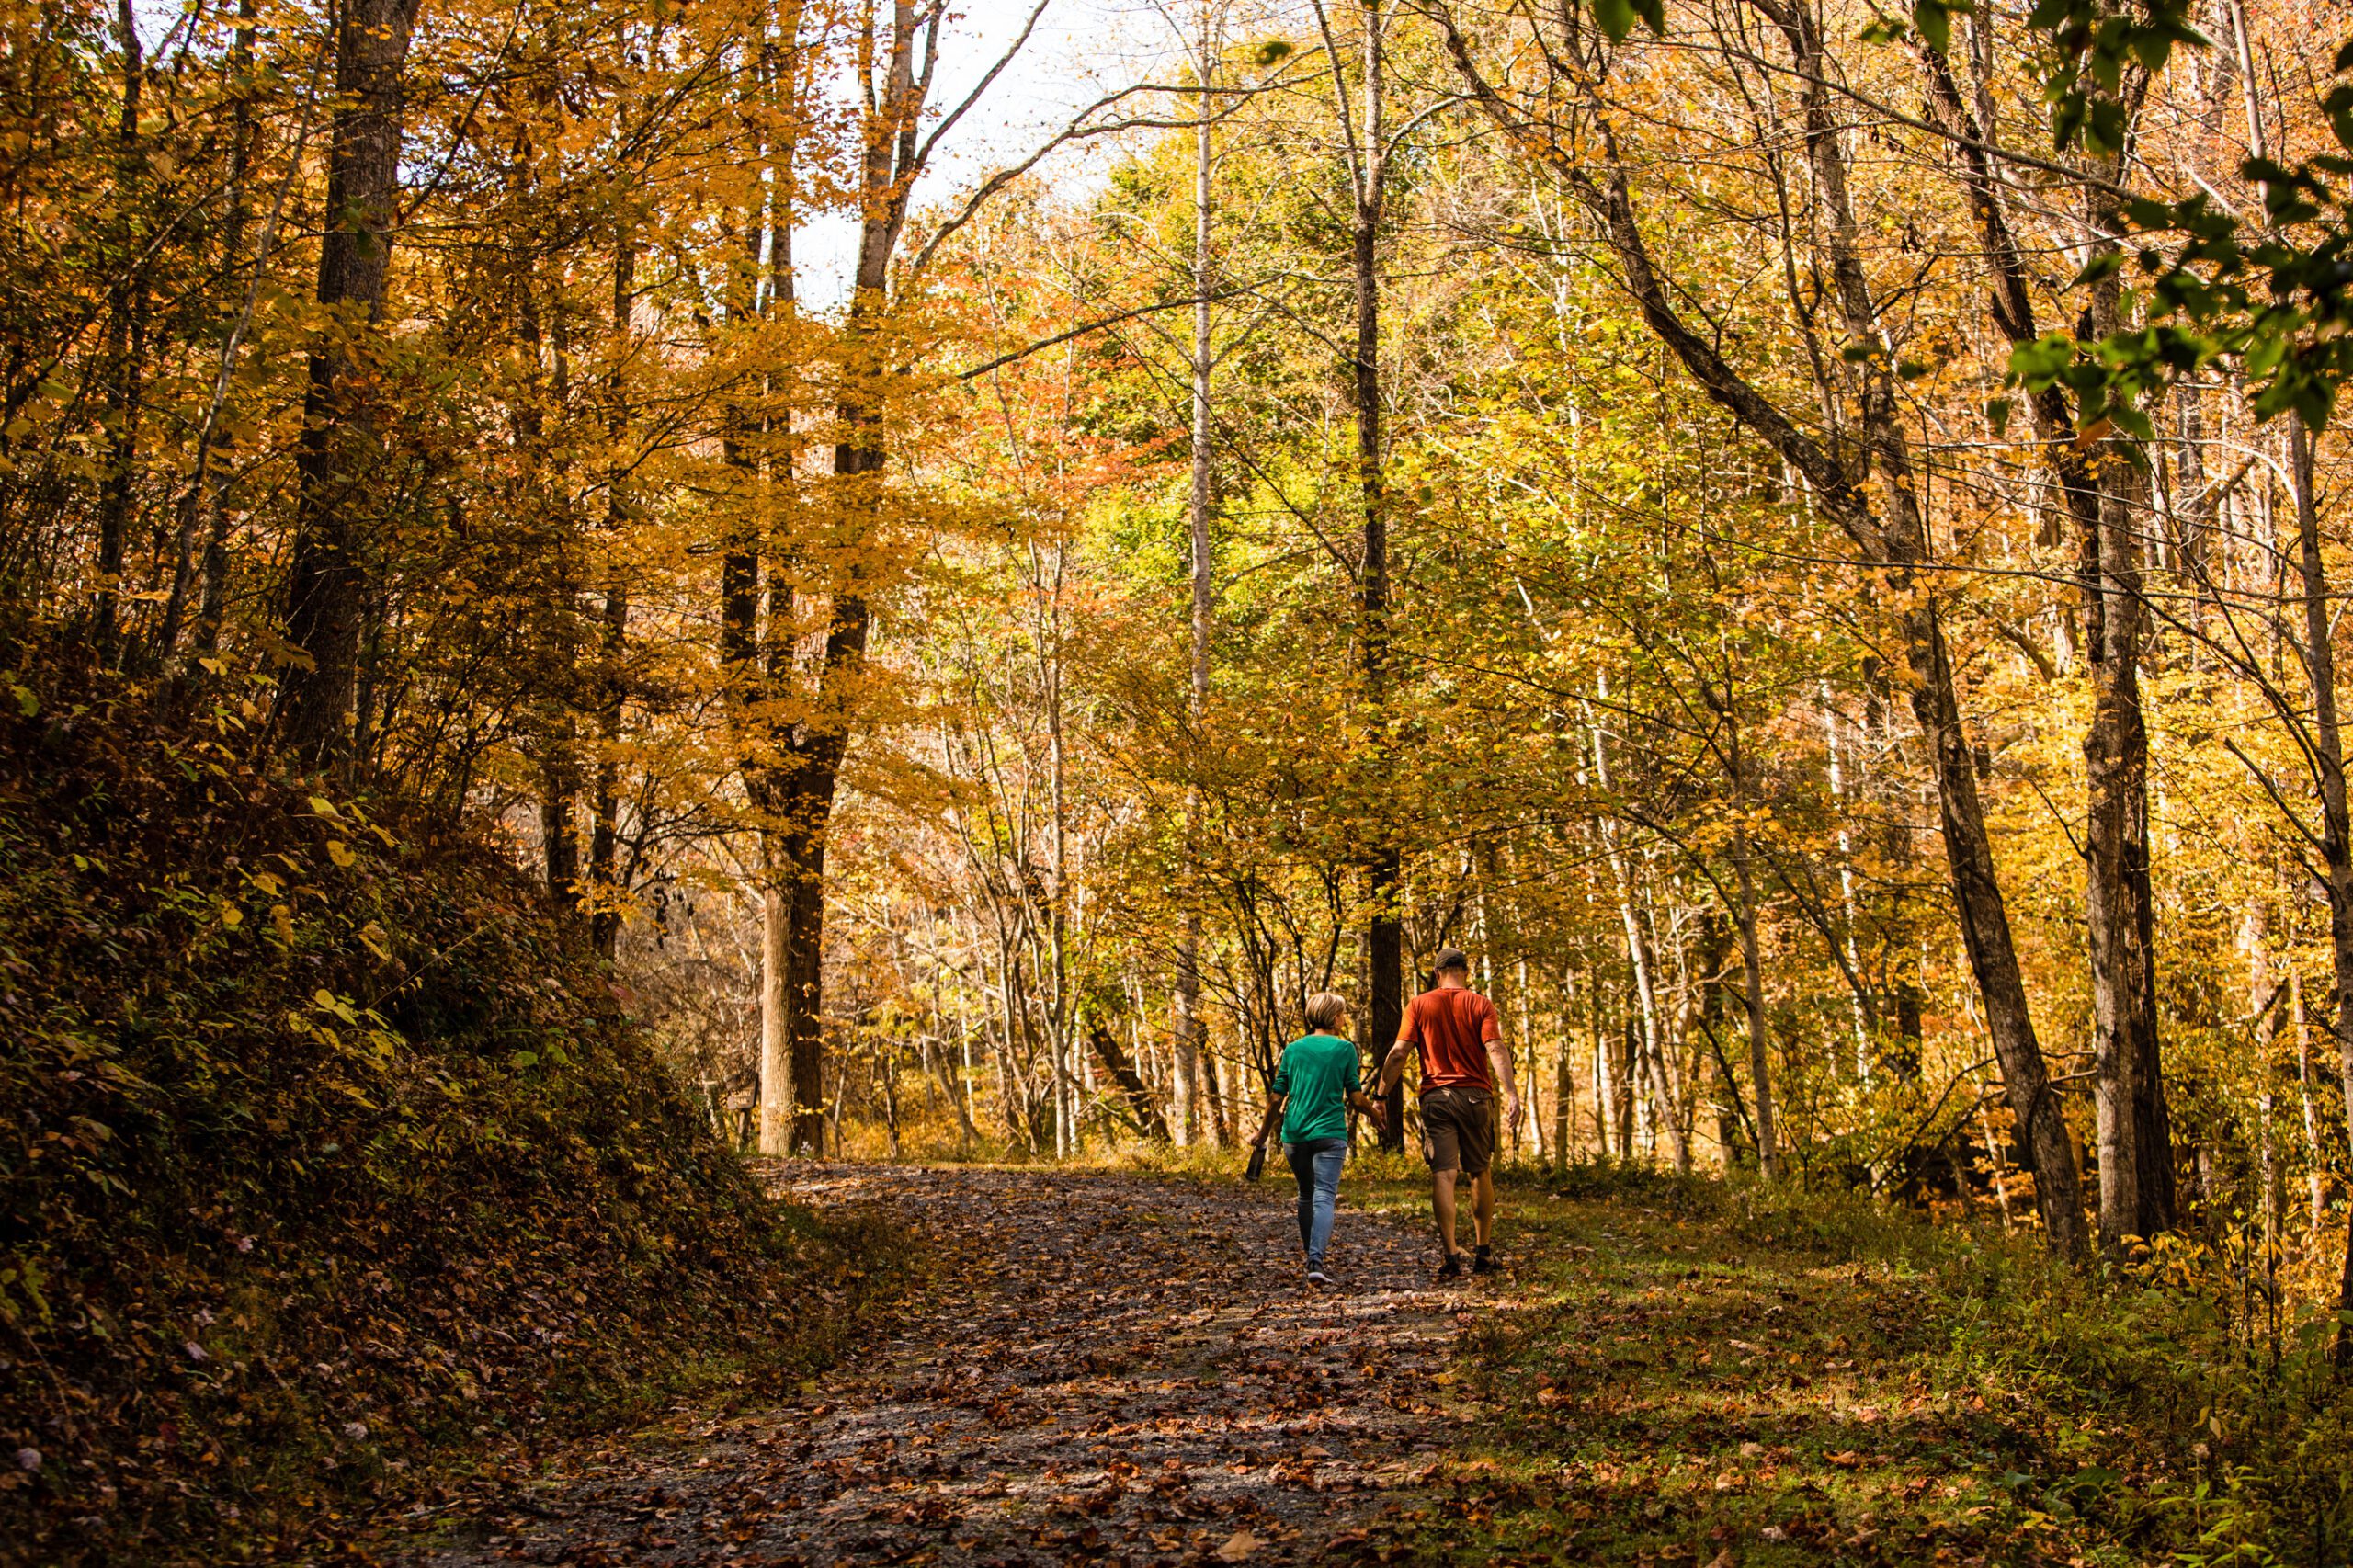 Where to Catch North Carolina’s Fall Leaves in All Their Glory